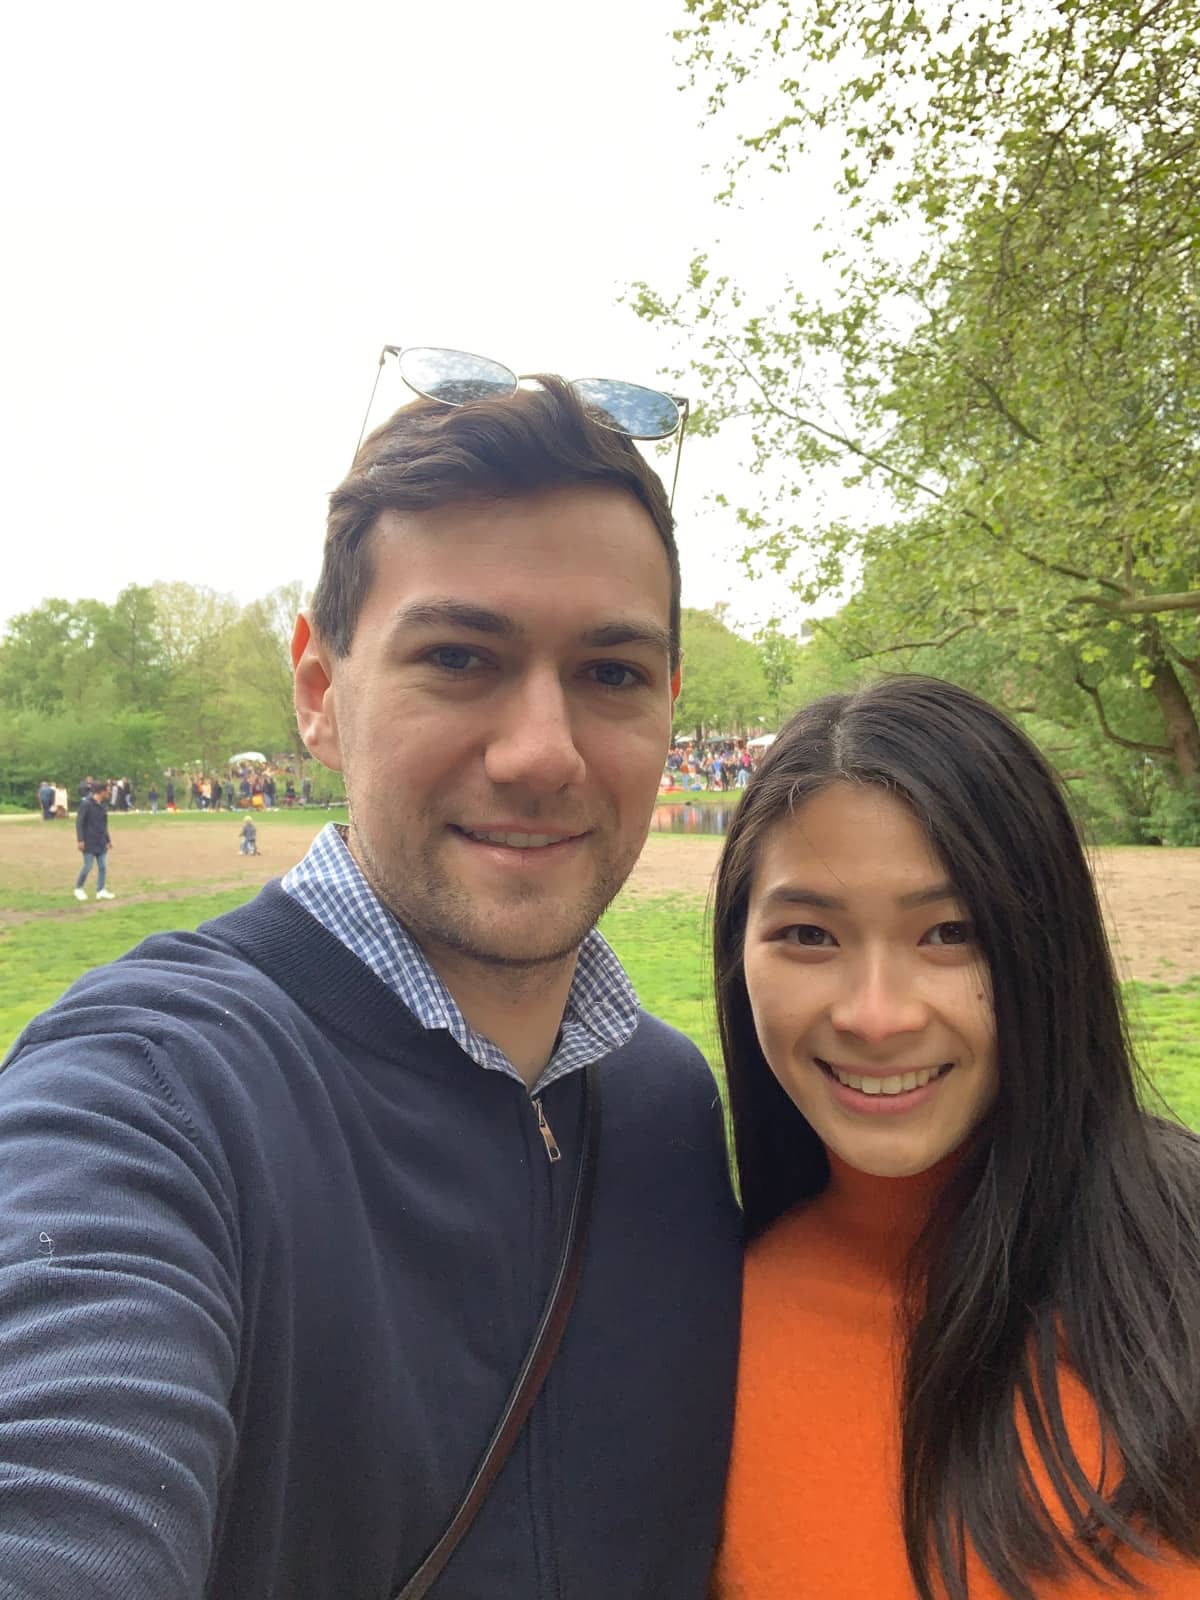 A man in a dark jacket and dark hair, and a woman in an orange turtleneck sweater, smiling for a selfie